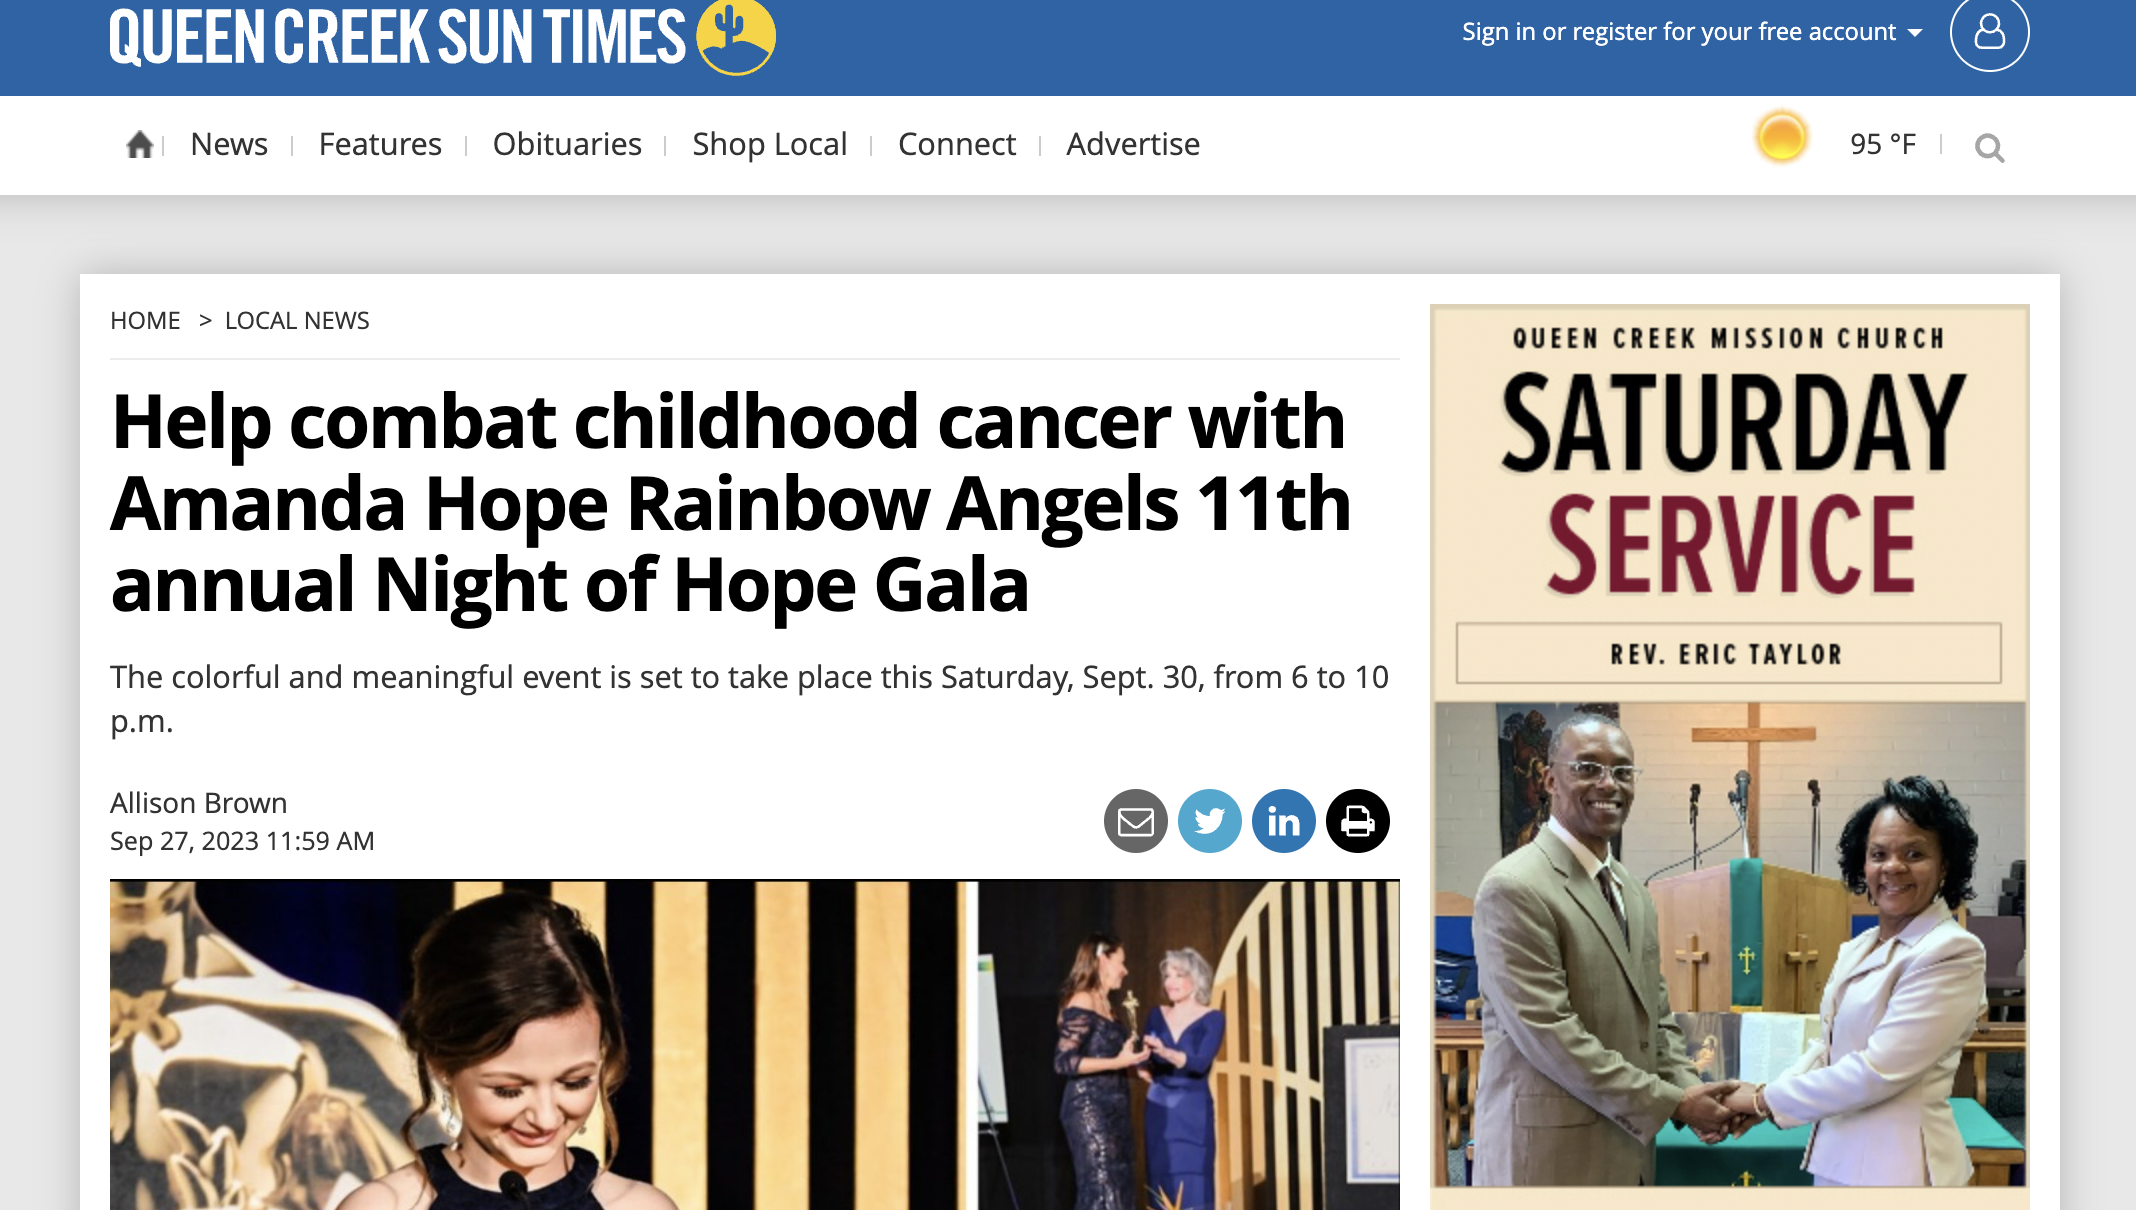 Queen Creek Sun Times: Help combat childhood cancer with Amanda Hope Rainbow Angels 11th annual Night of Hope Gala (Copy)